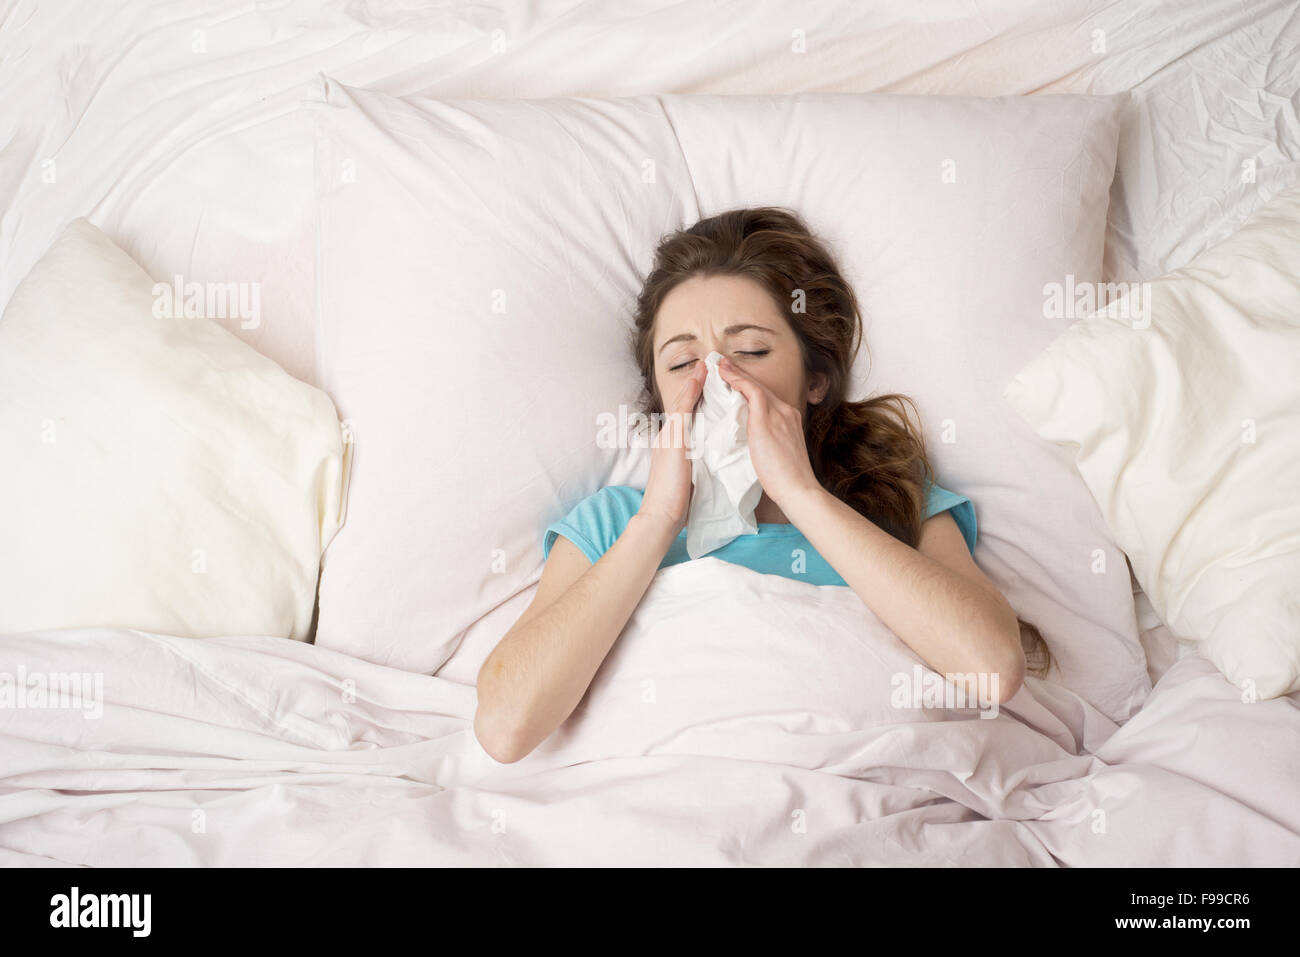 Sick woman lying in bed with high fever. She is blowing nose. Stock Photo